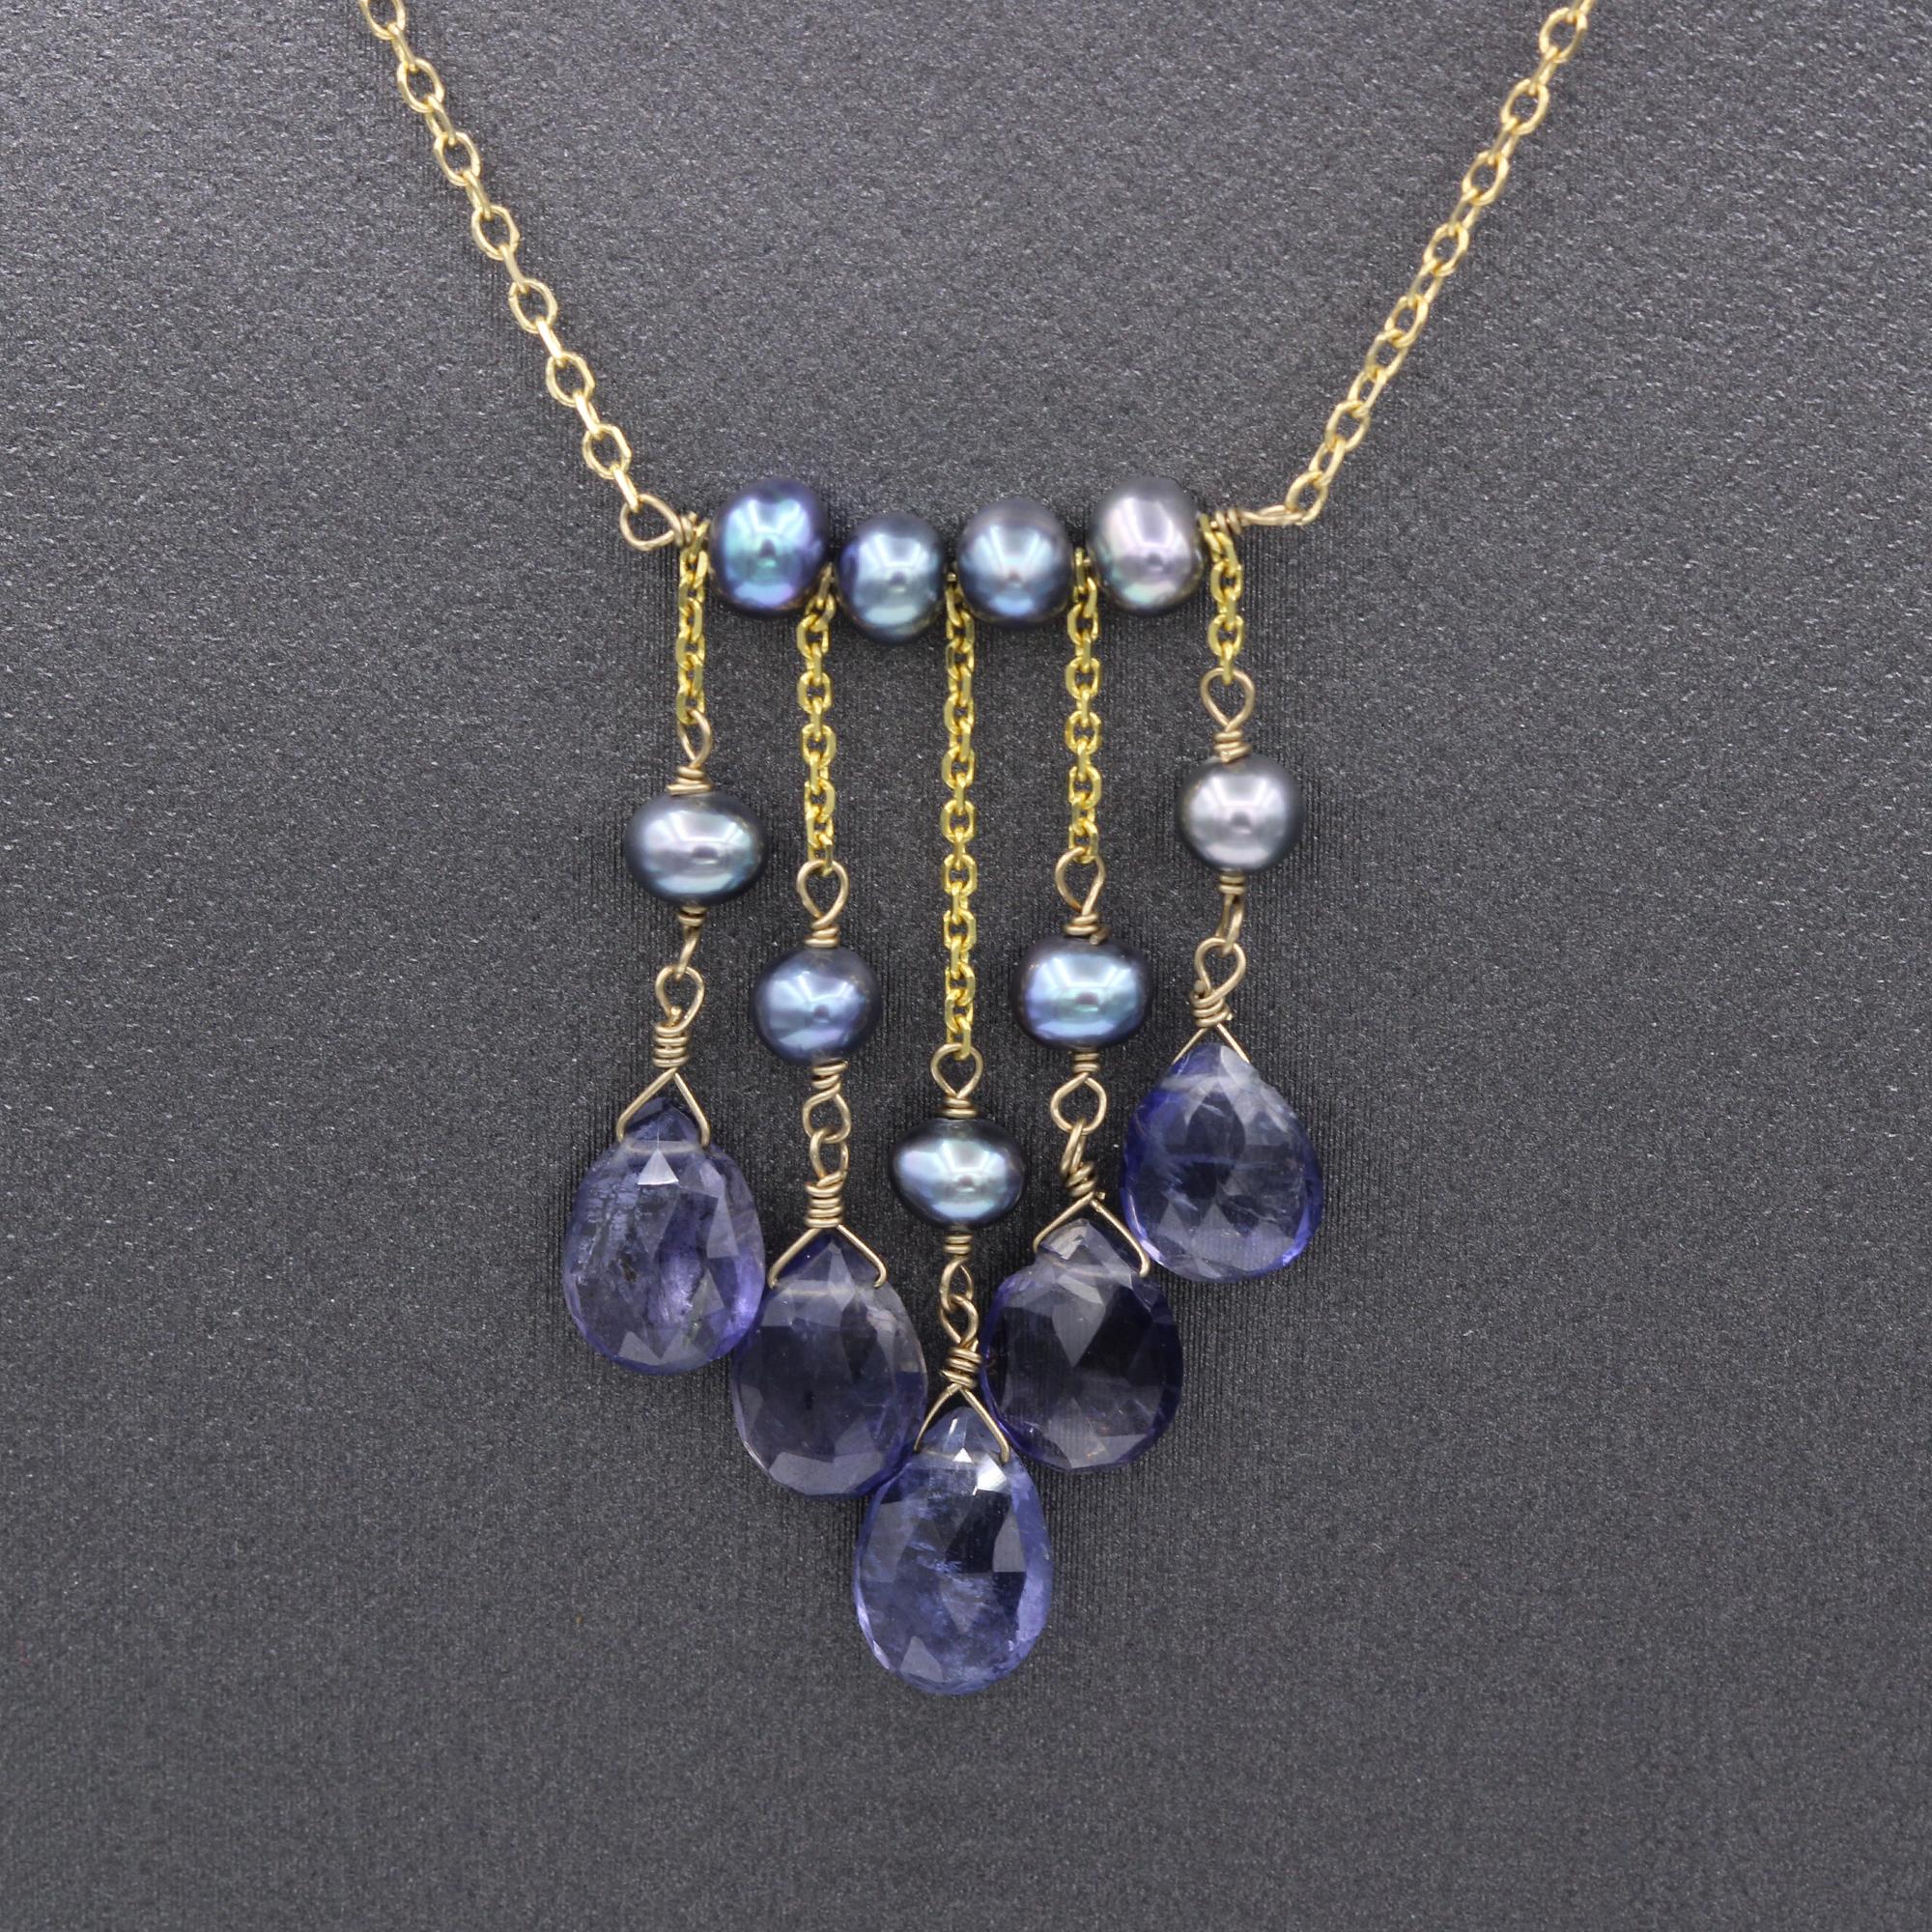 Elegant Beaded Necklace with Dangling Amethyst & Pearls – Wire Style
14k Yellow Gold 
Length 16’ inch 
Dangle Length approx. 1.25’ inch
Fresh water grey pearls approx. 3-4 mm 
Natural Amethyst drops (blu-ish purple tone color) approx.  9x6 mm
Spring